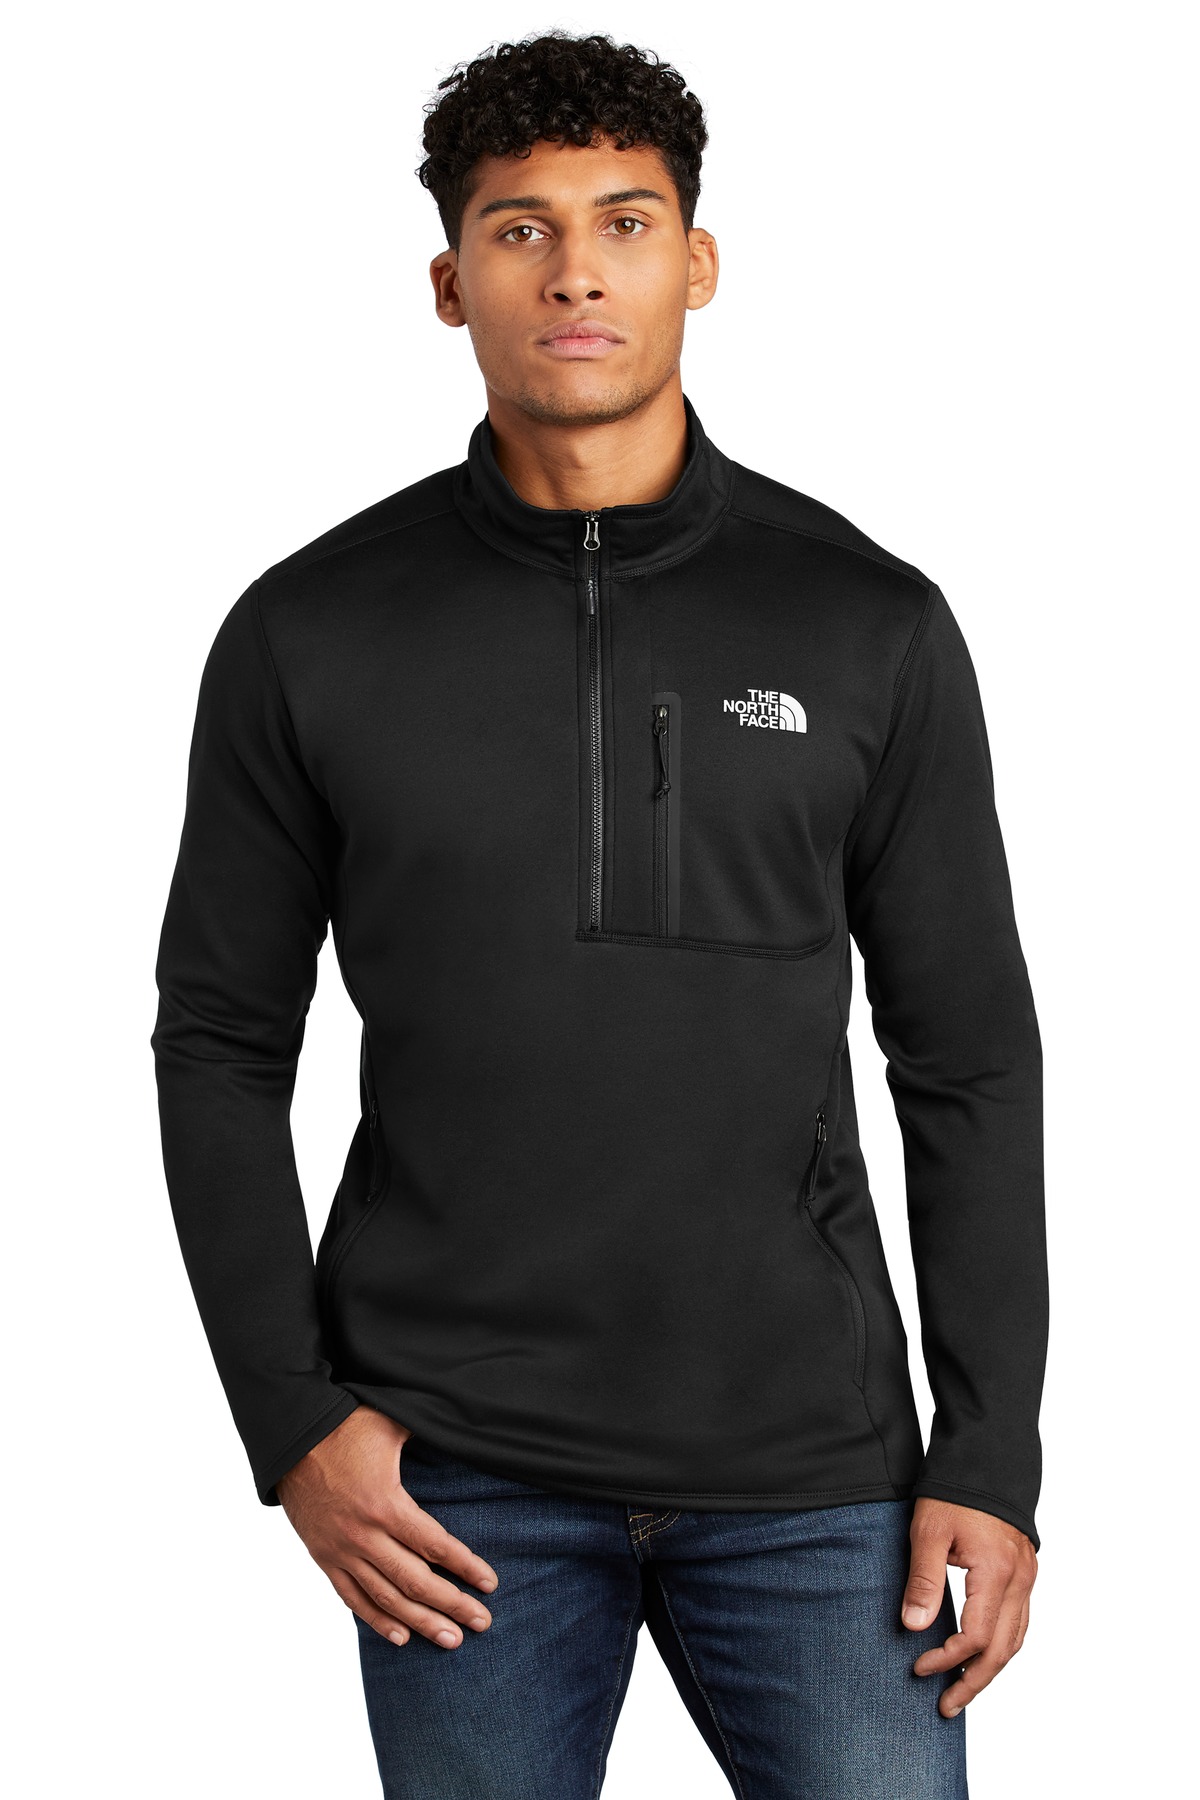 Buy The North Face Skyline 1/2-Zip Fleece - The North Face Online at ...